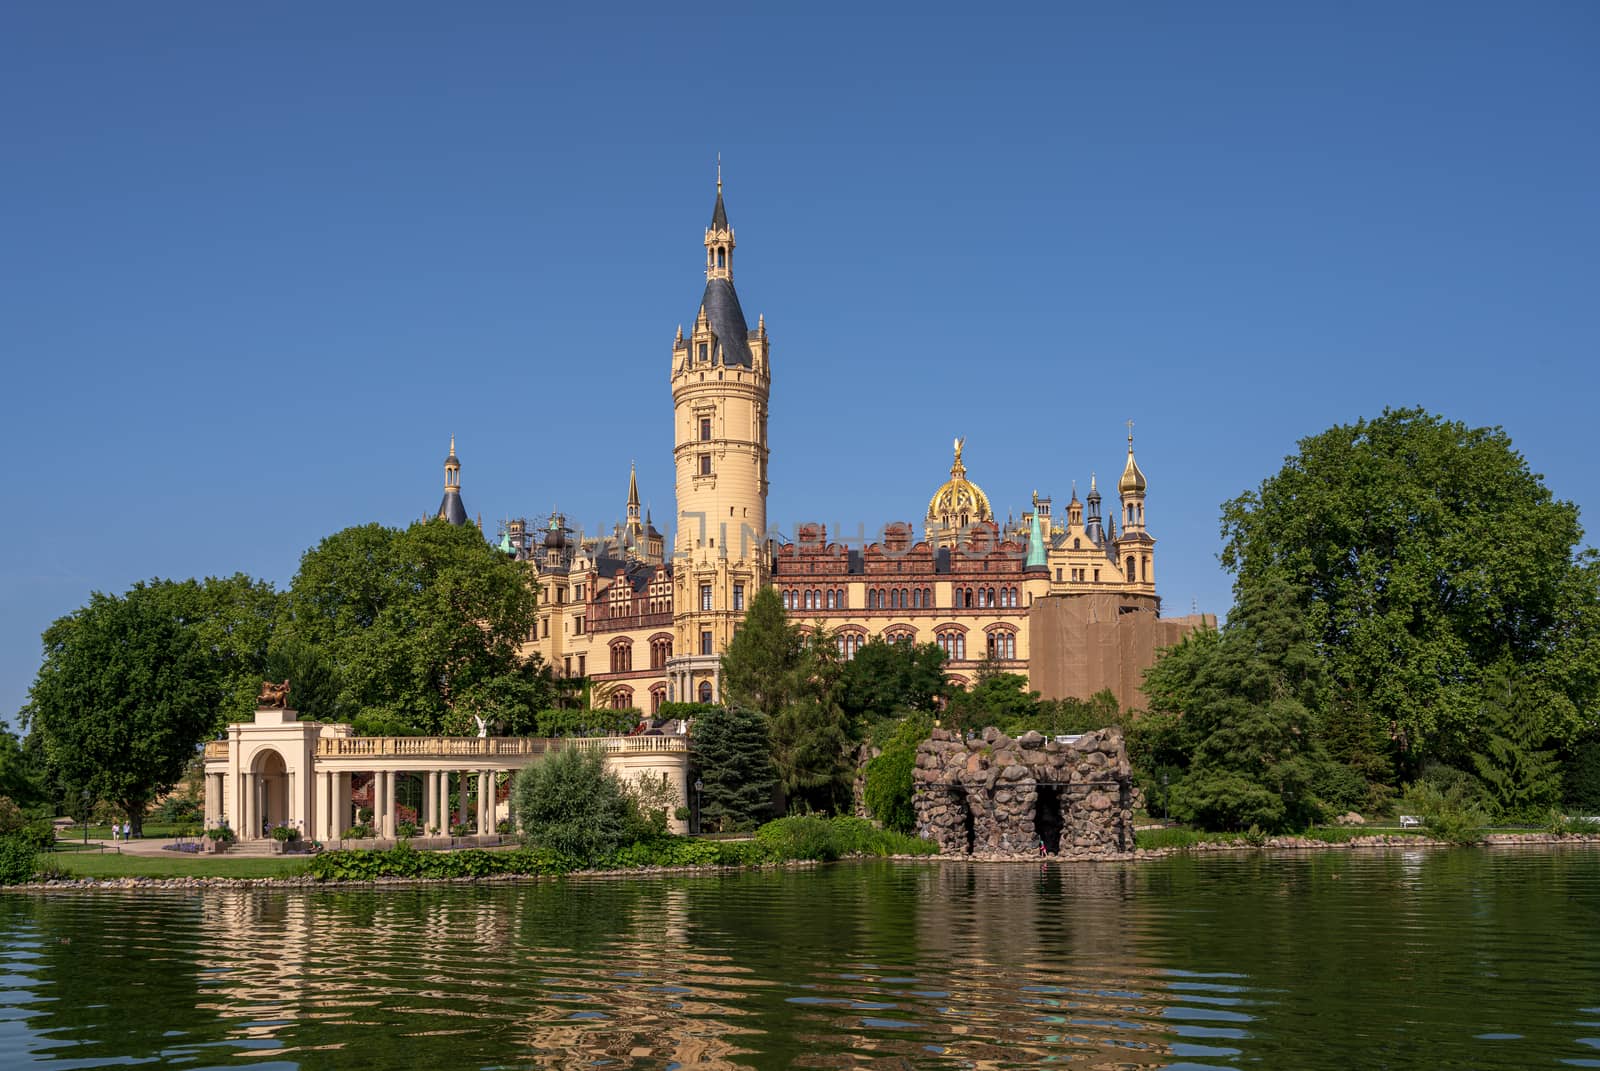 A side angle view of Schwerin Palace and its gardens.